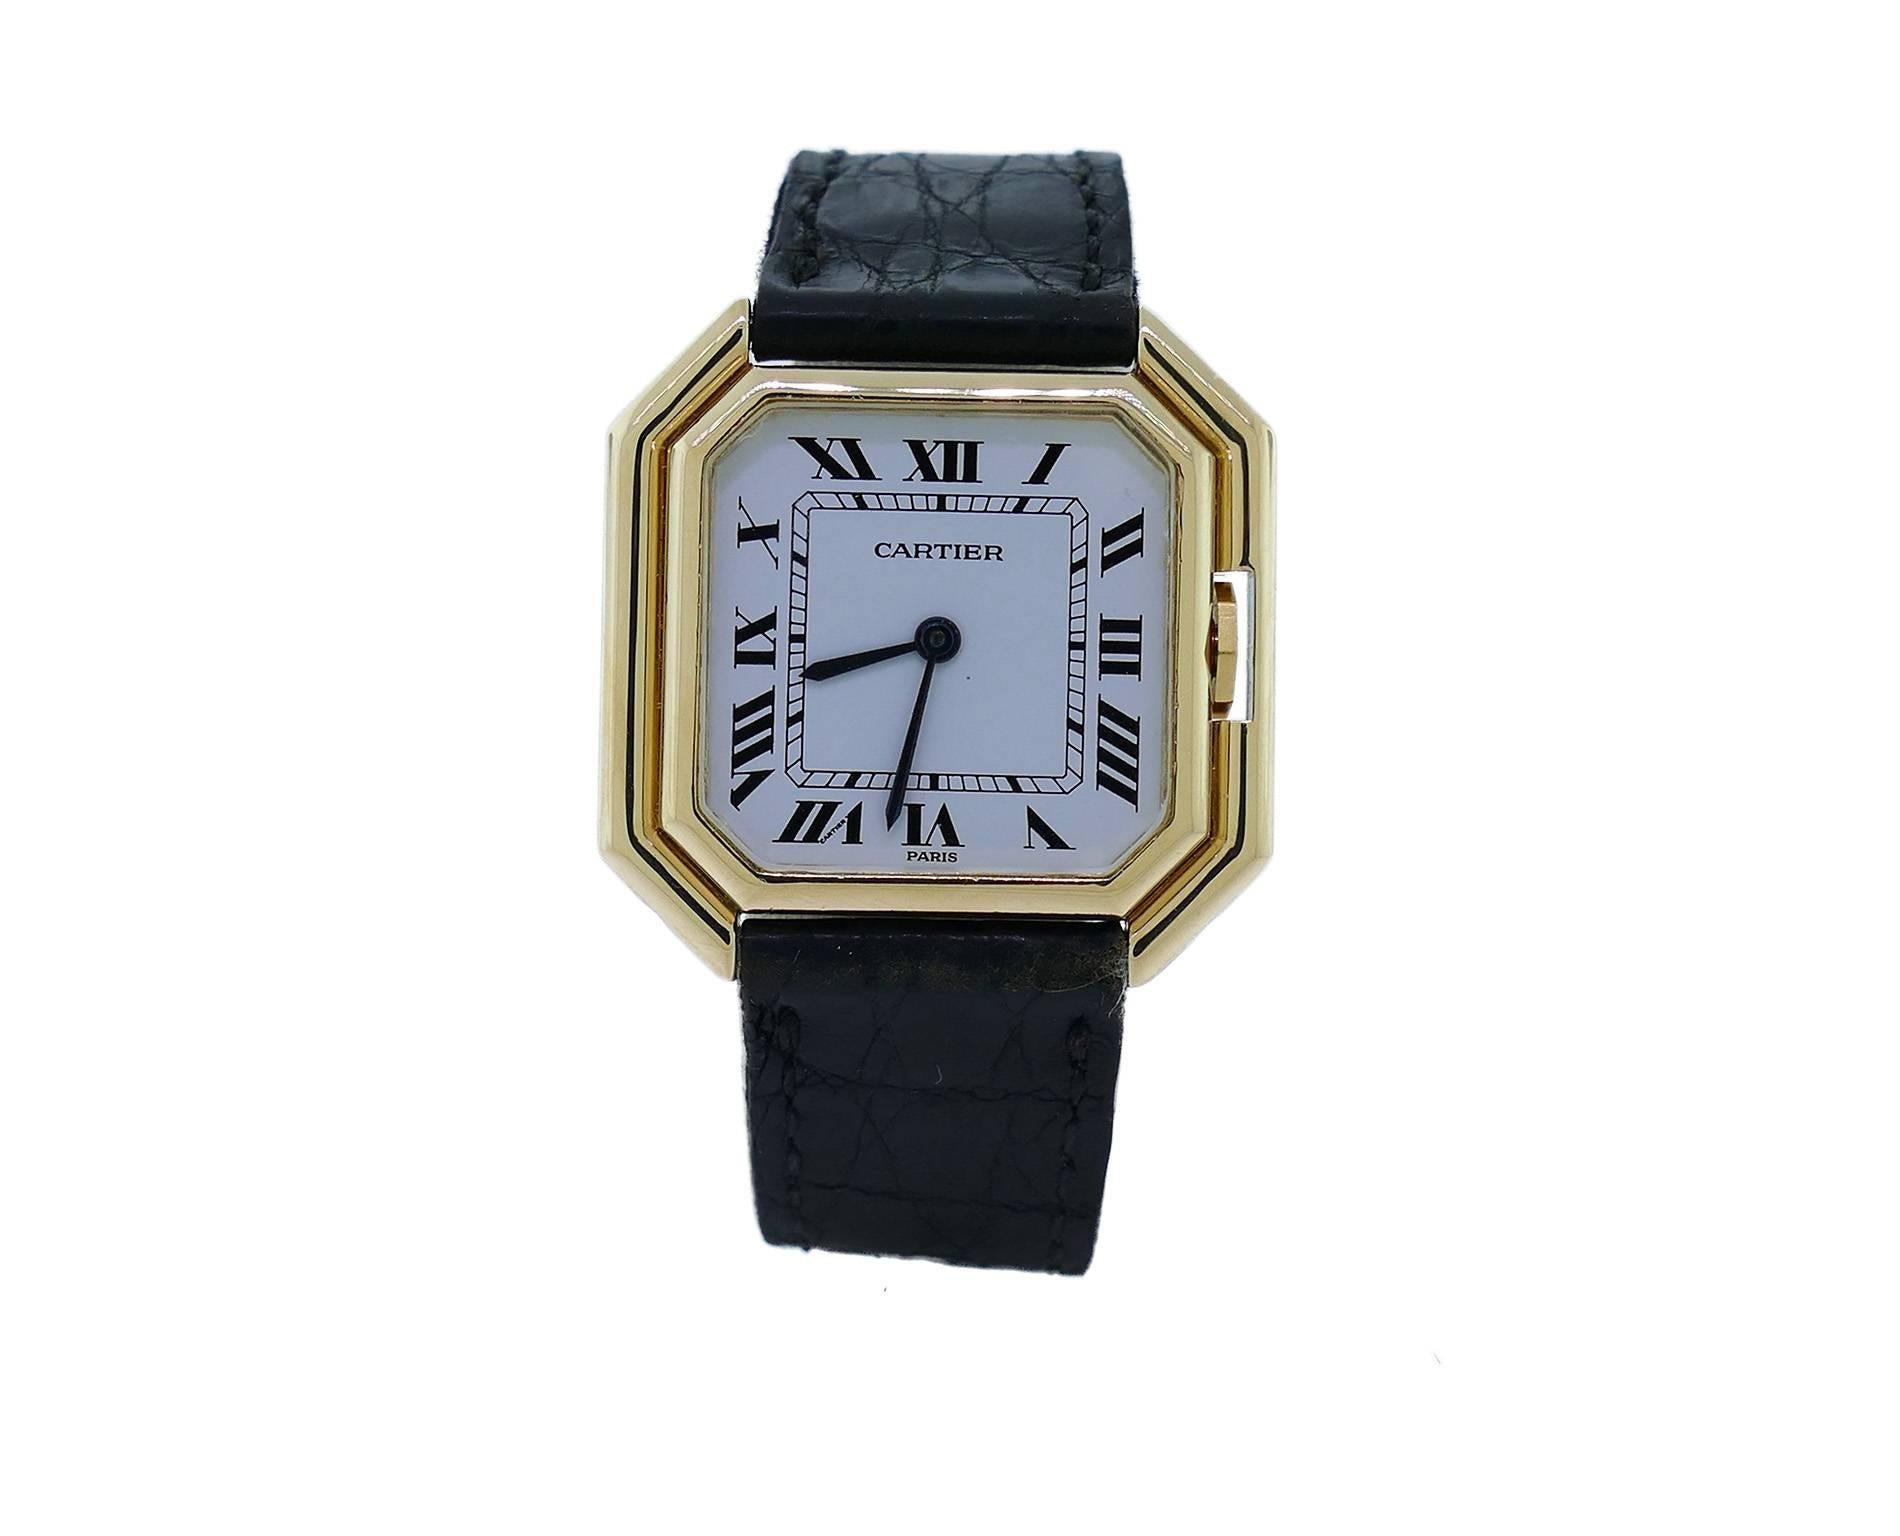 Vintage & Rare Mens Cartier Ceinture Large (30x31) Automatic 18k Yellow Gold Watch. The Watch is in Great Condition & Keeping Perfect Time, Movement is Powered by Automatic Mechanical Winding. The Watch is on a Generic Strap & Cartier 18k Deployment